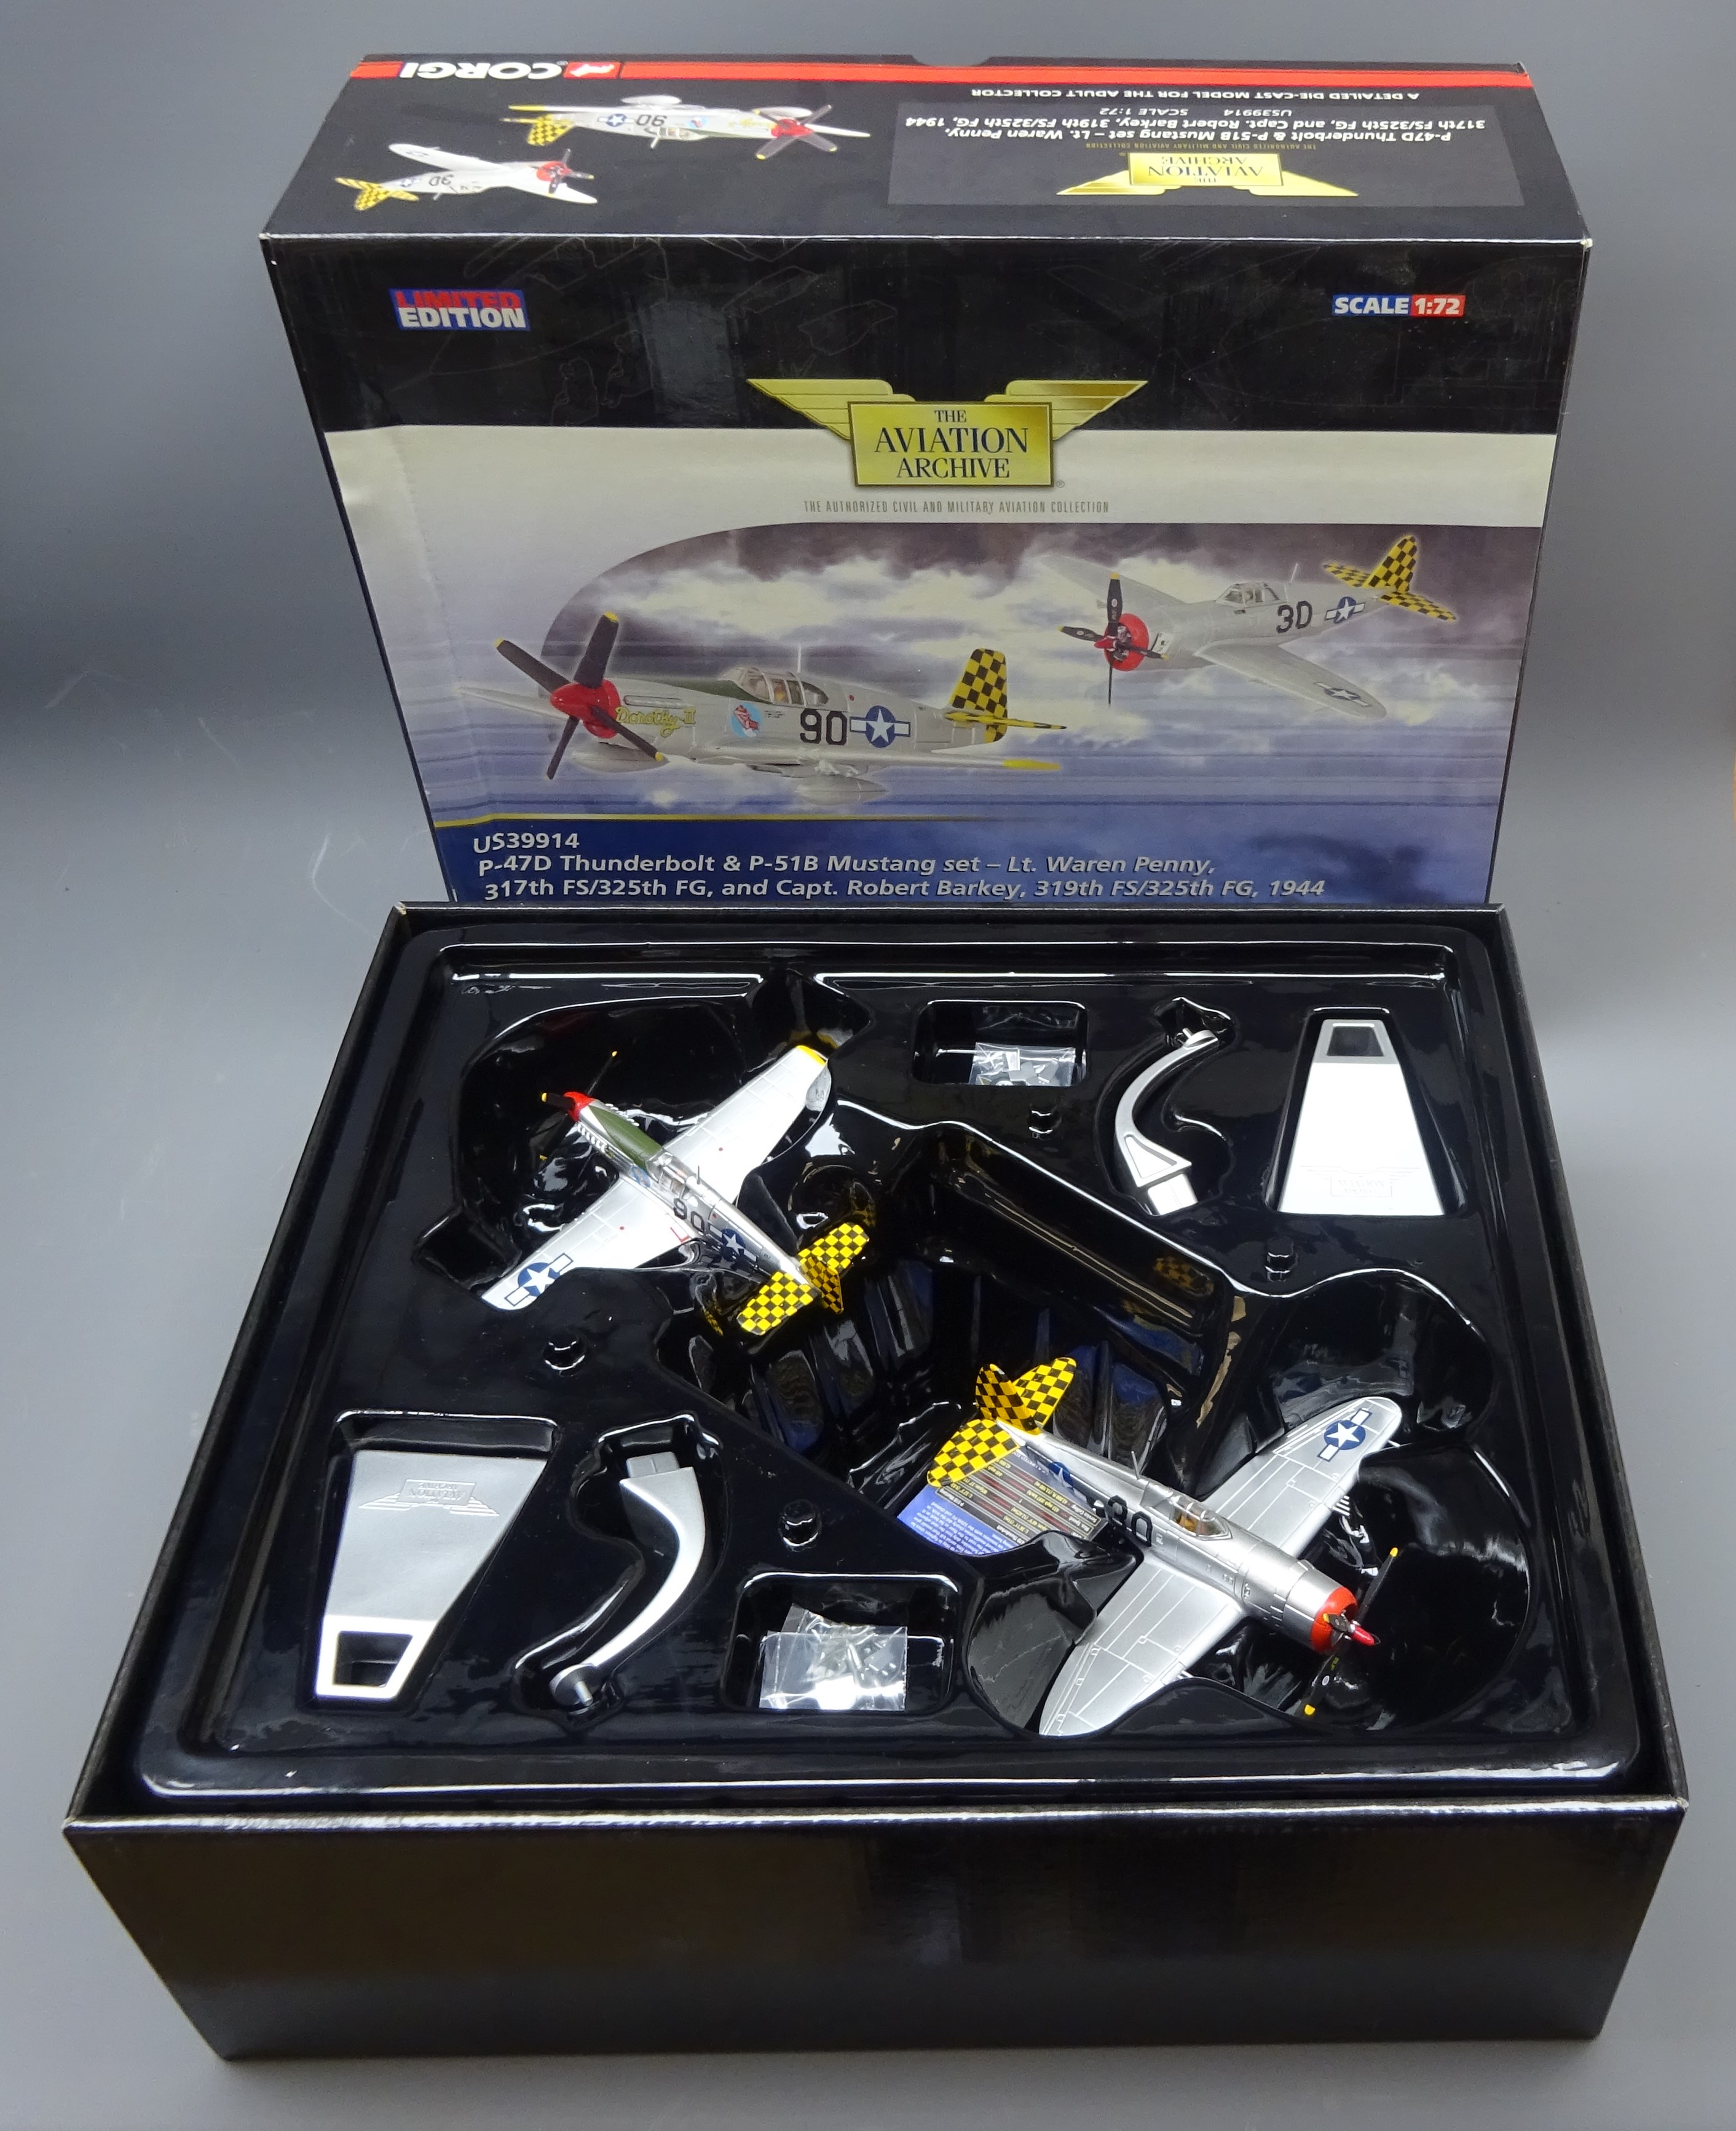 Corgi Aviation Archive limited edition P-47D Thunderbolt and P-51B Mustang Set